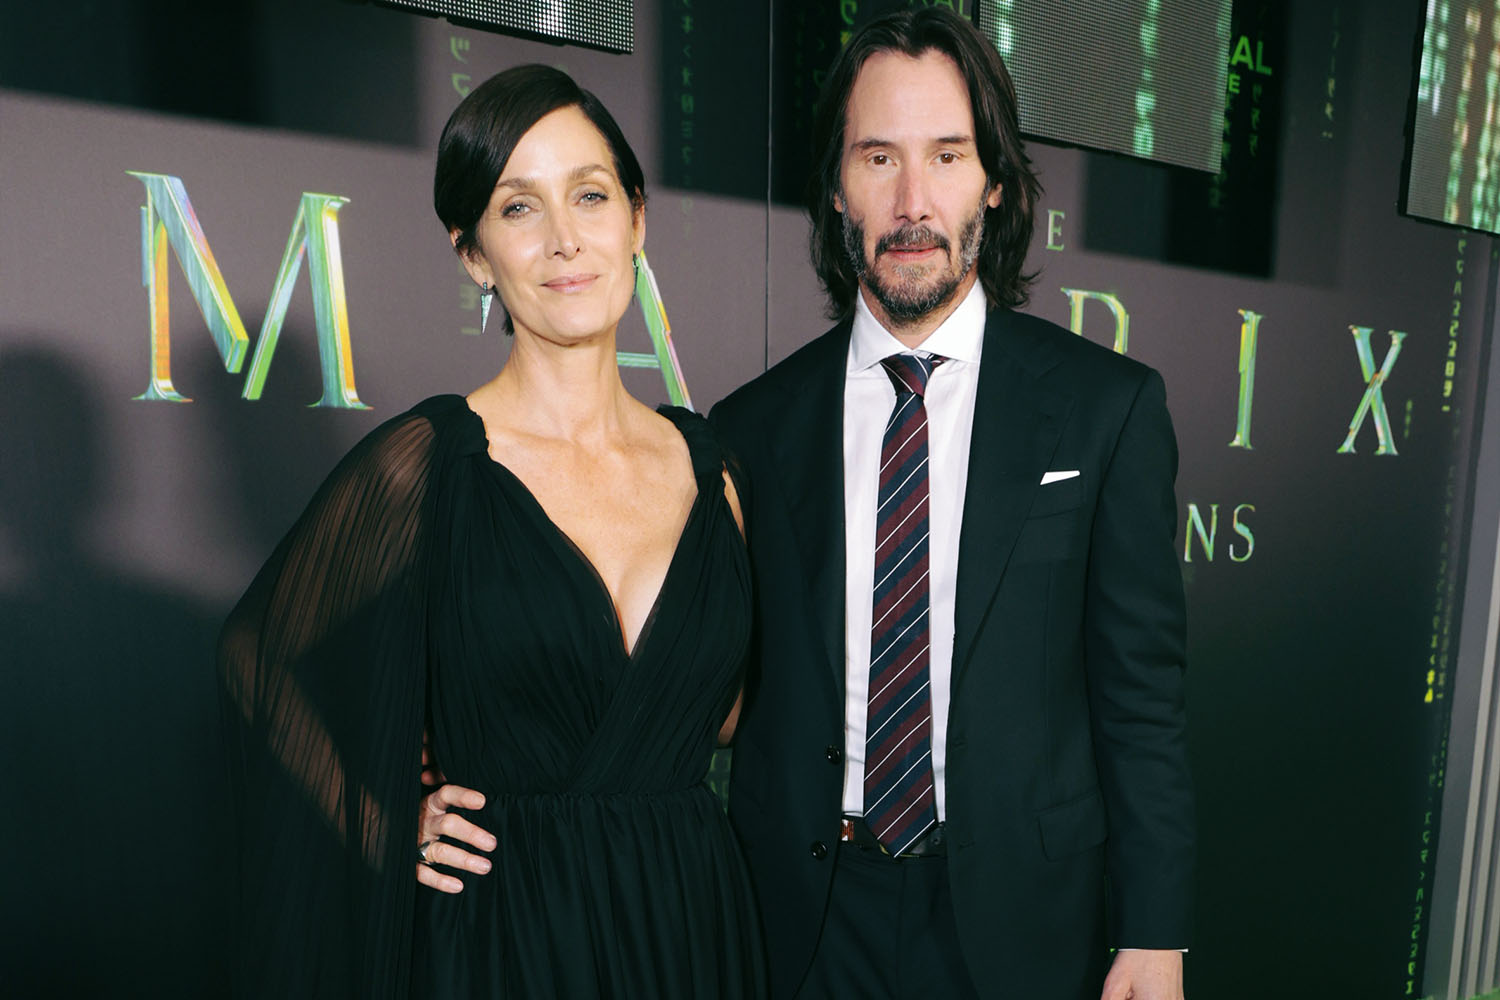 Actors Carrie-Anne Moss and Keanu Reeves